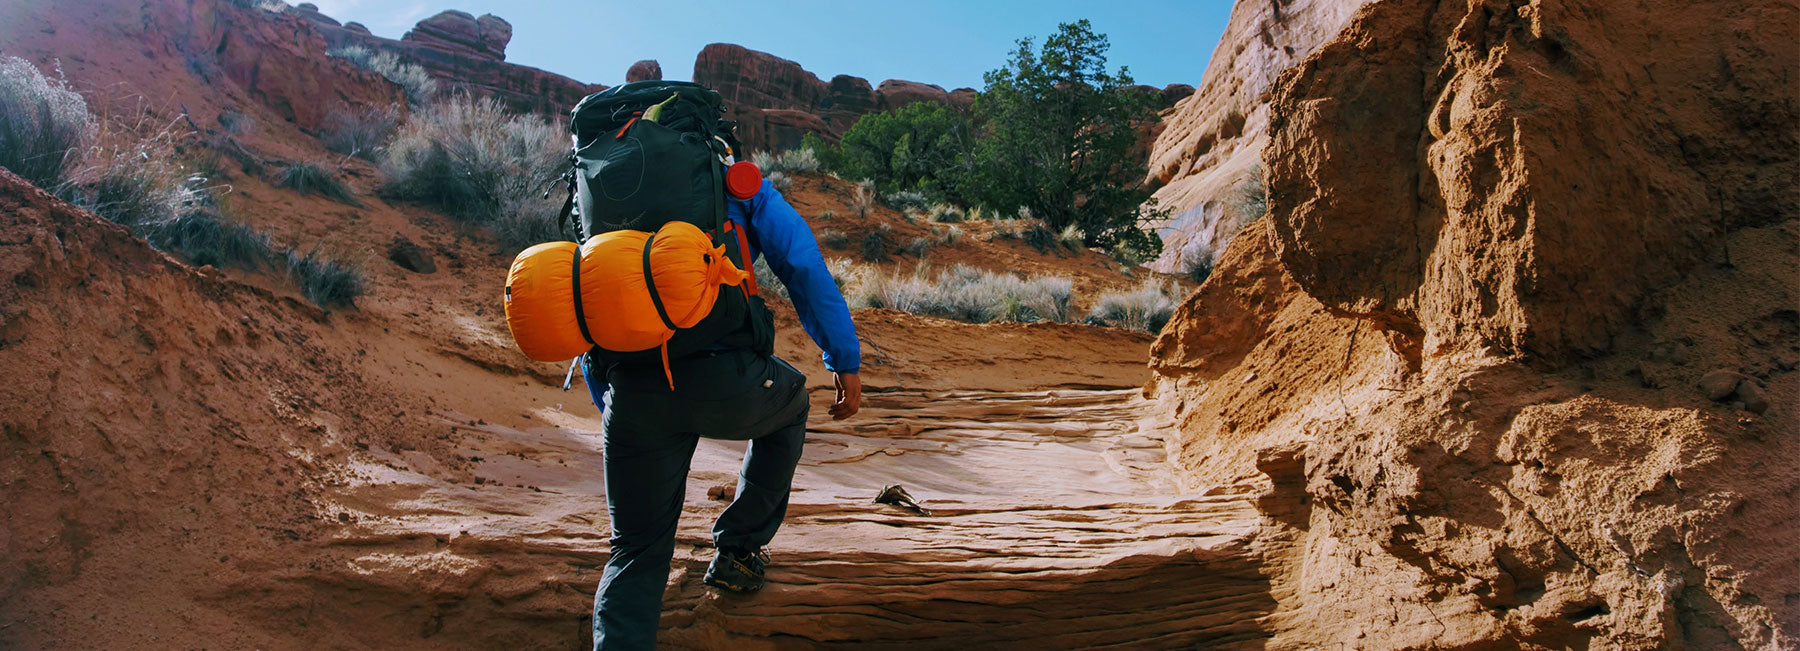 Guy backpacking up canyon during the daytime